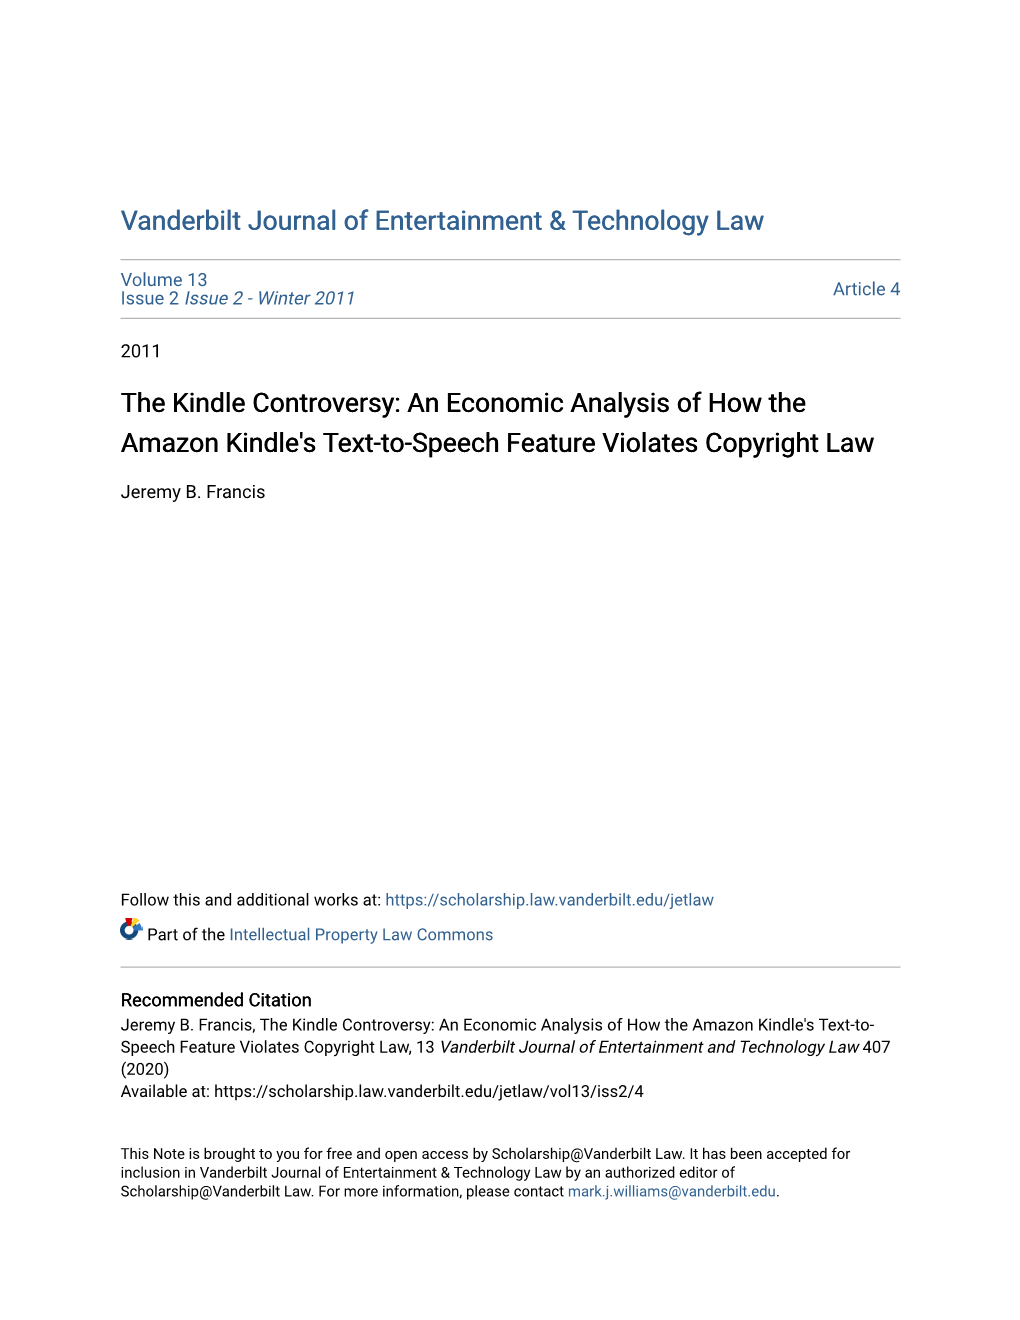 The Kindle Controversy: an Economic Analysis of How the Amazon Kindle's Text-To-Speech Feature Violates Copyright Law